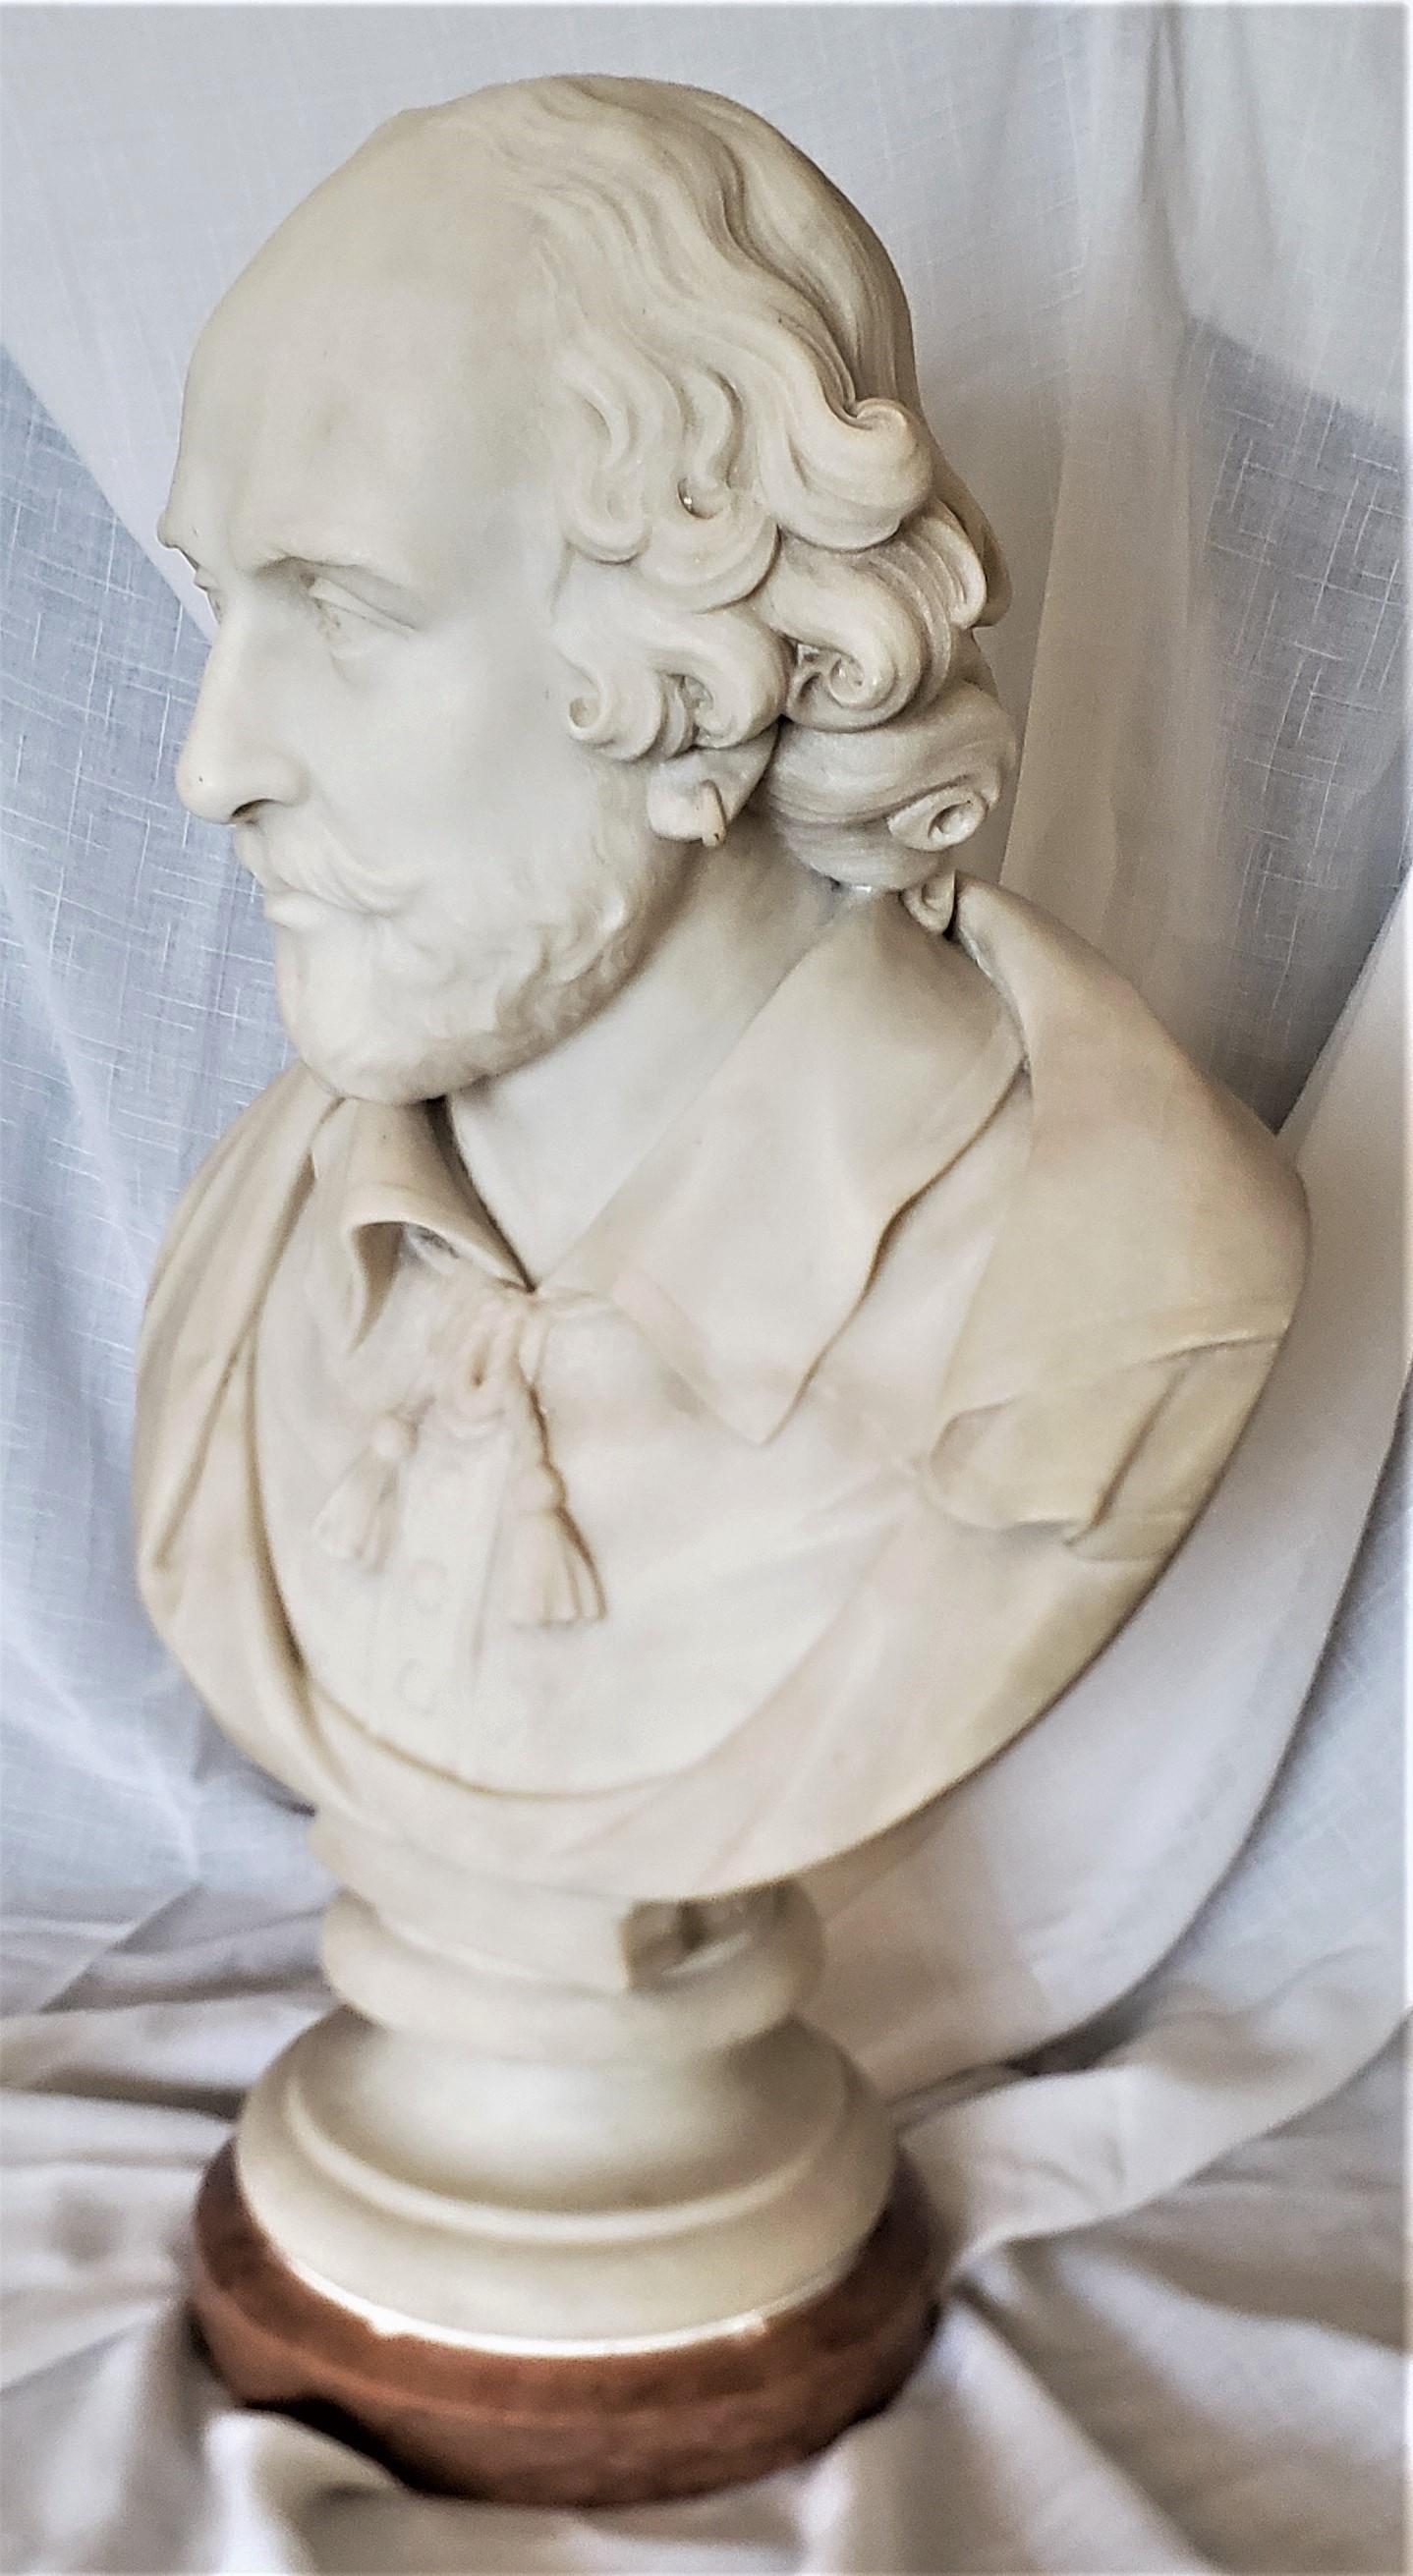 Victorian Large Antique English Signed C. Papworth Hand-Carved Marble Bust or Sculpture For Sale